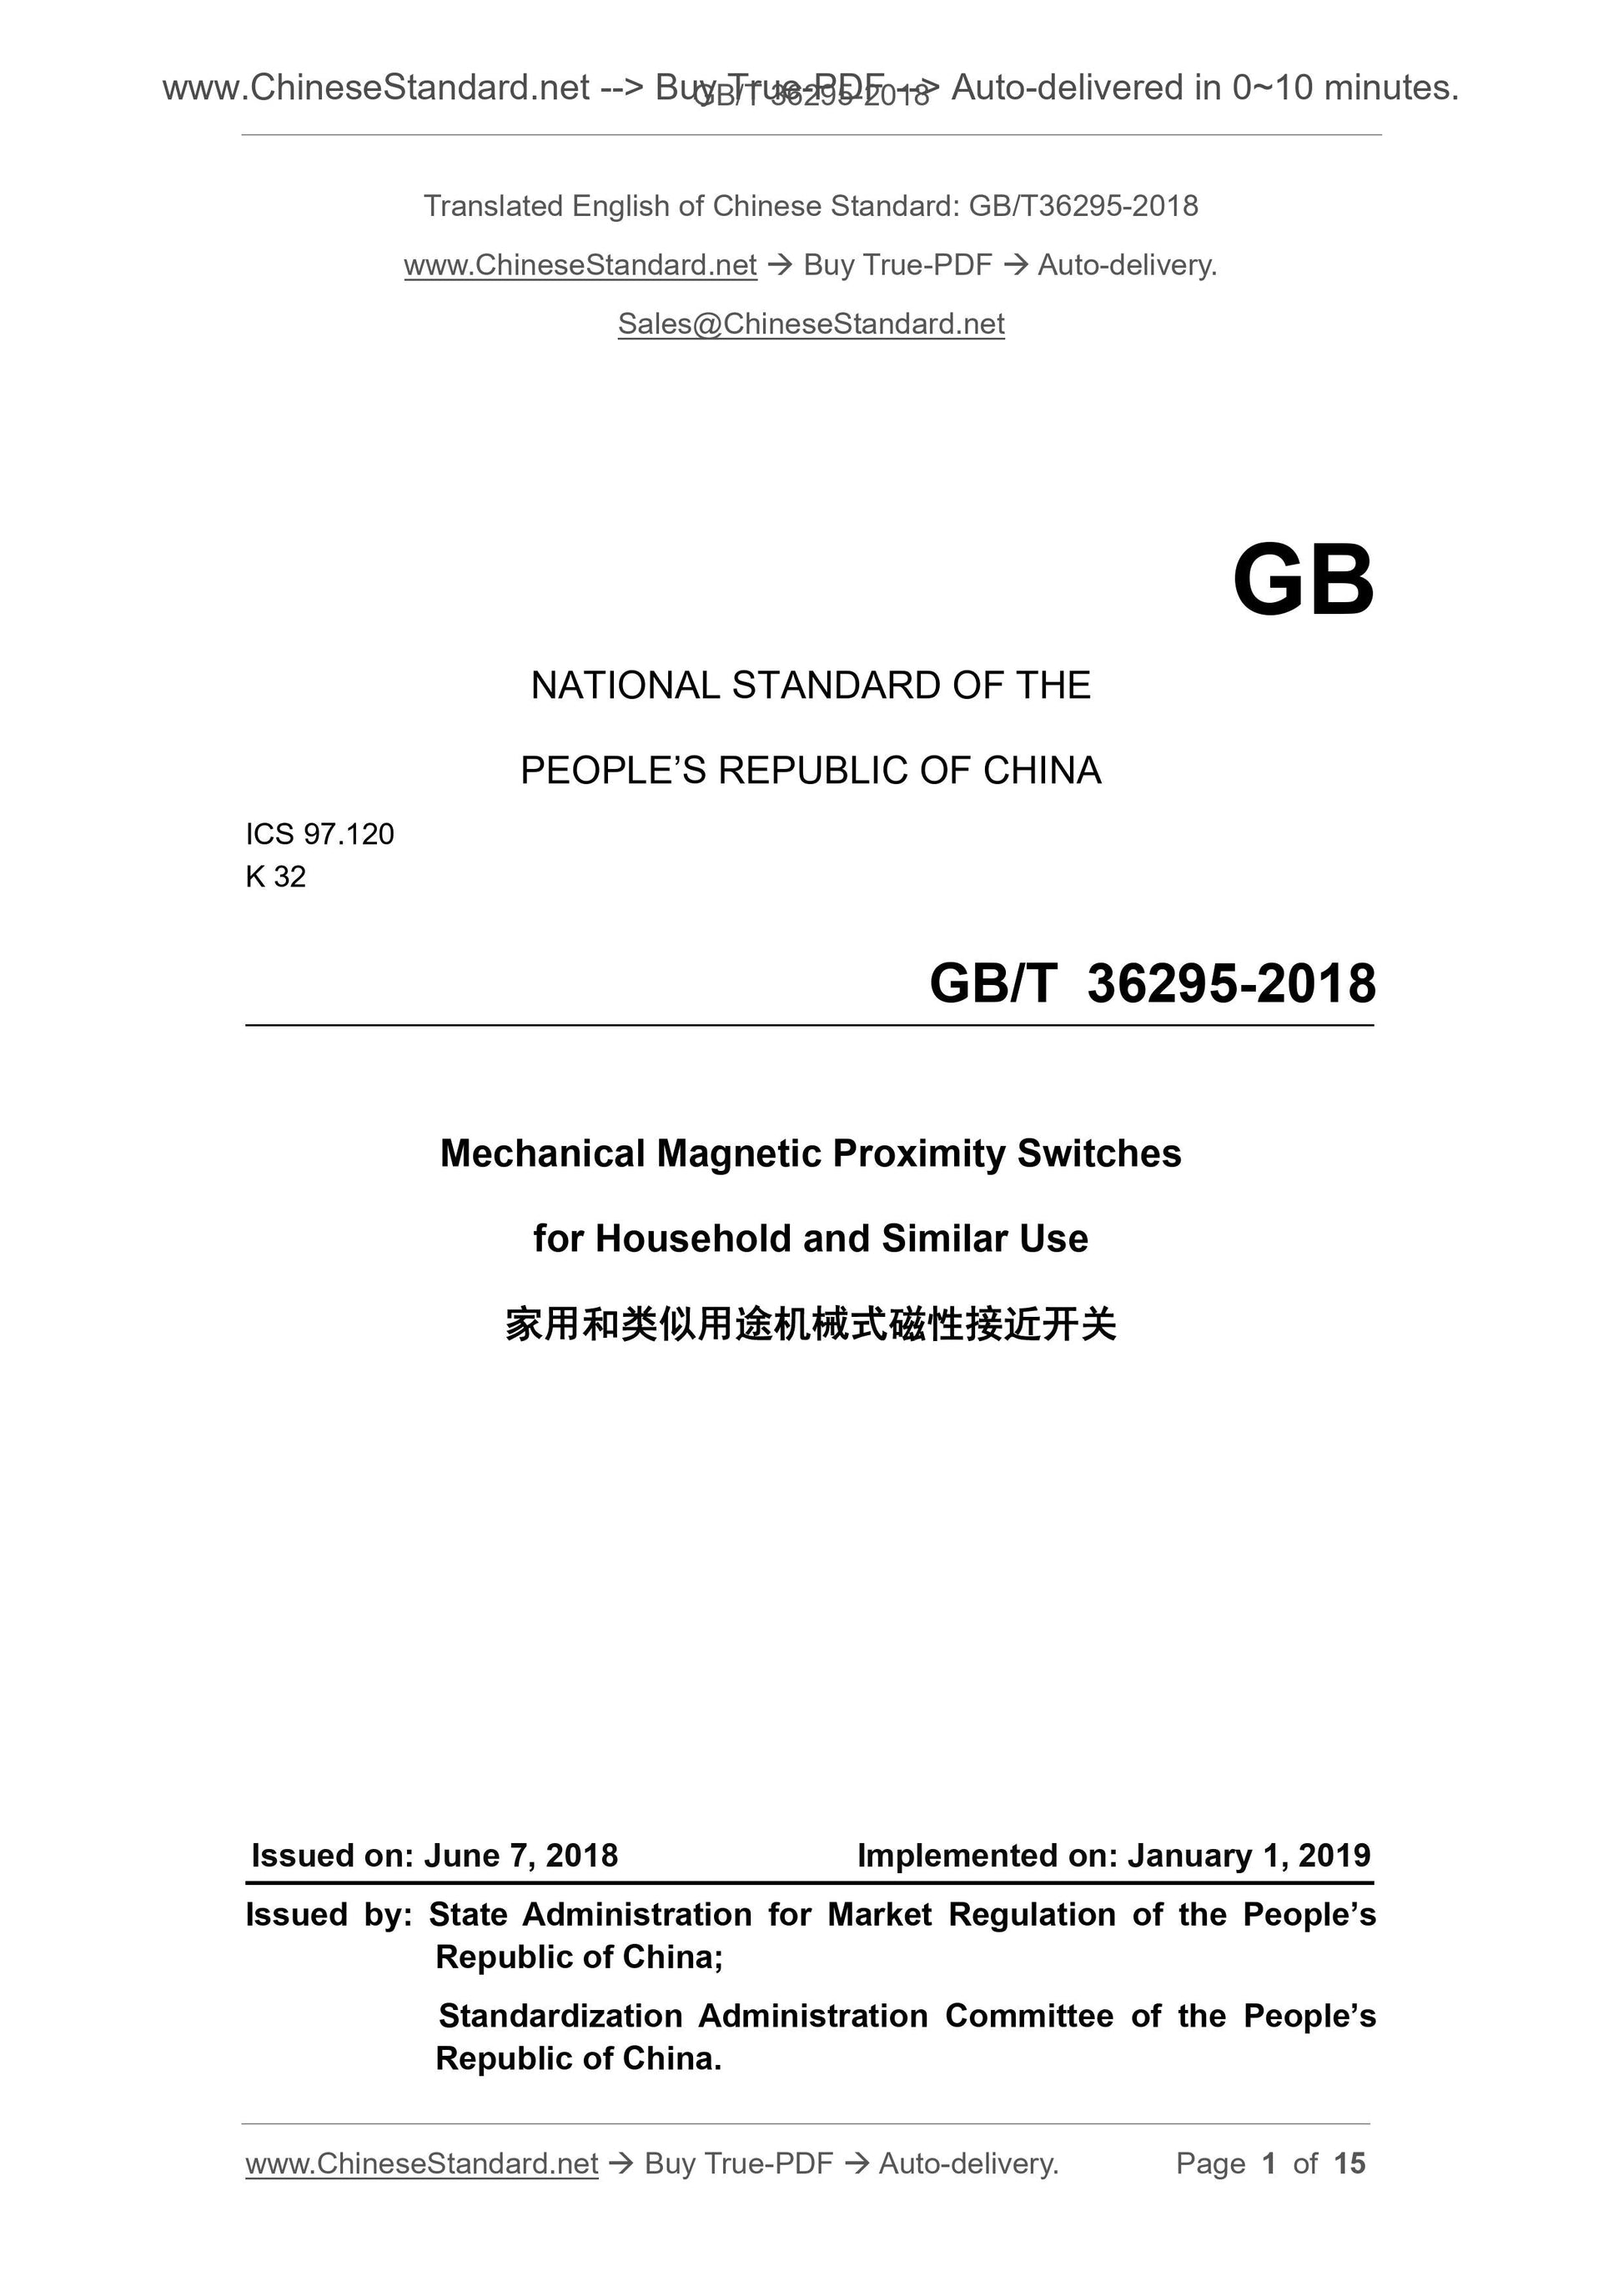 GB/T 36295-2018 Page 1